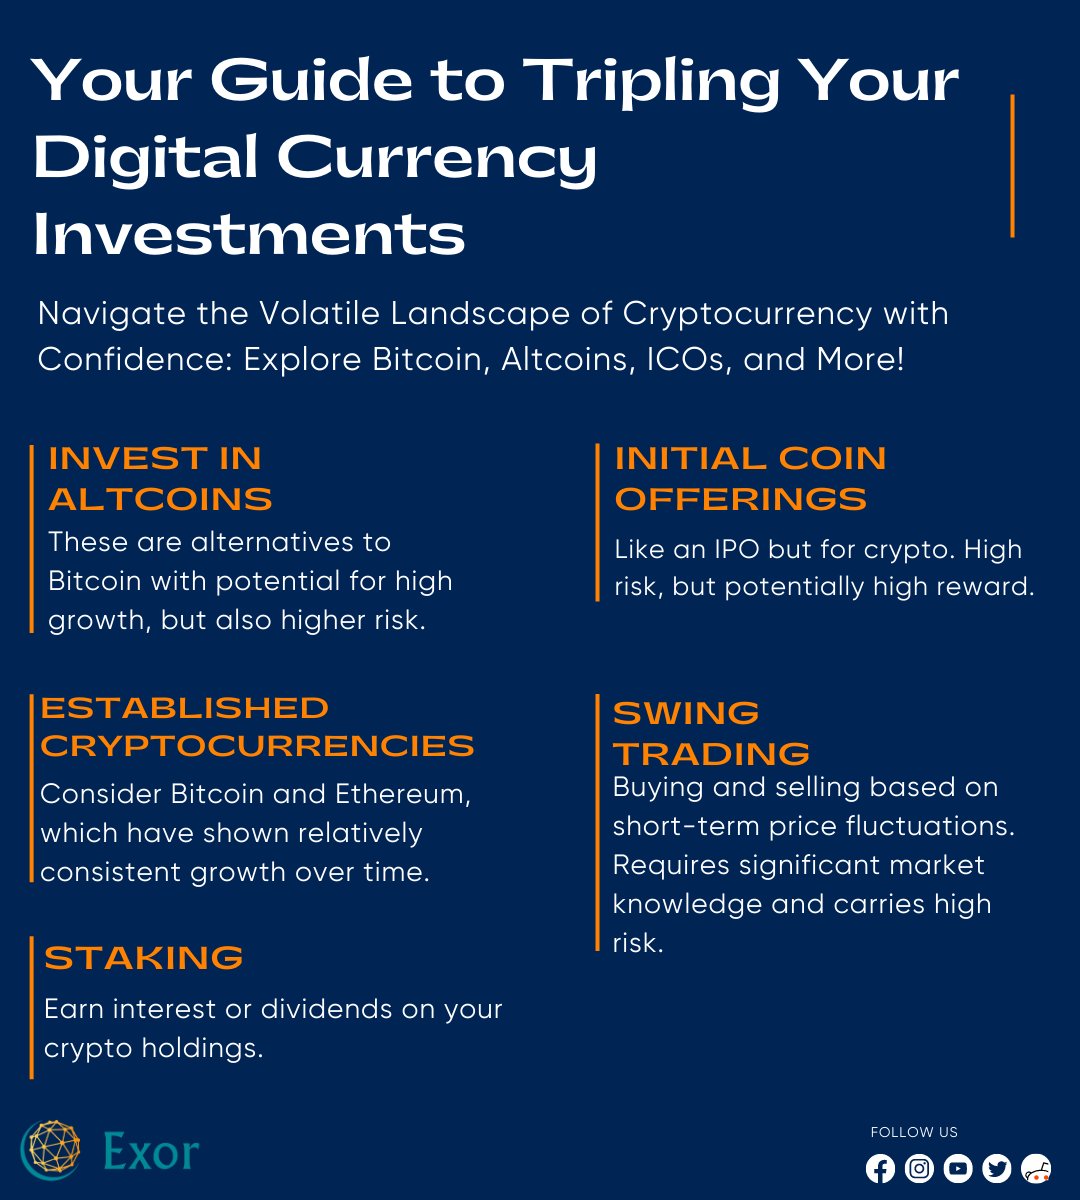 Achieve threefold growth in your digital currency investments with our expert guide. Gain insights, minimize risks, and maximize returns. Elevate your crypto portfolio with Exor Company. 

#CryptoInvestments #ExpertGuide #ExorCompany